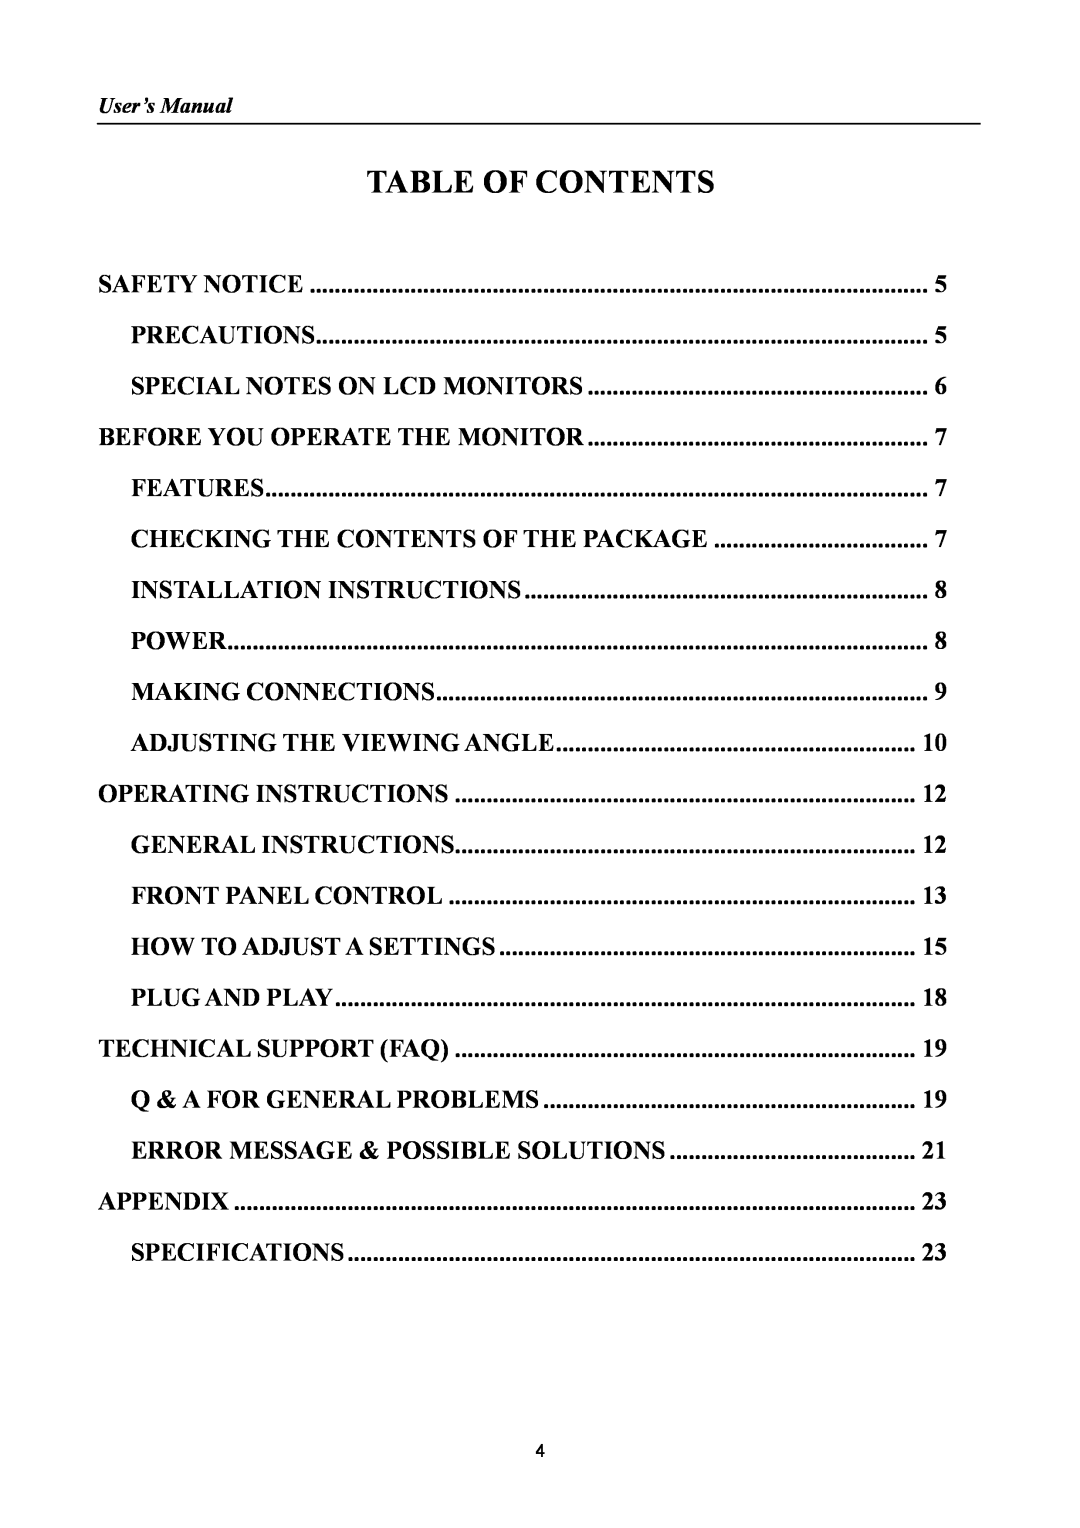 Hanns.G HH221 manual Table Of Contents, Error Message & Possible Solutions 